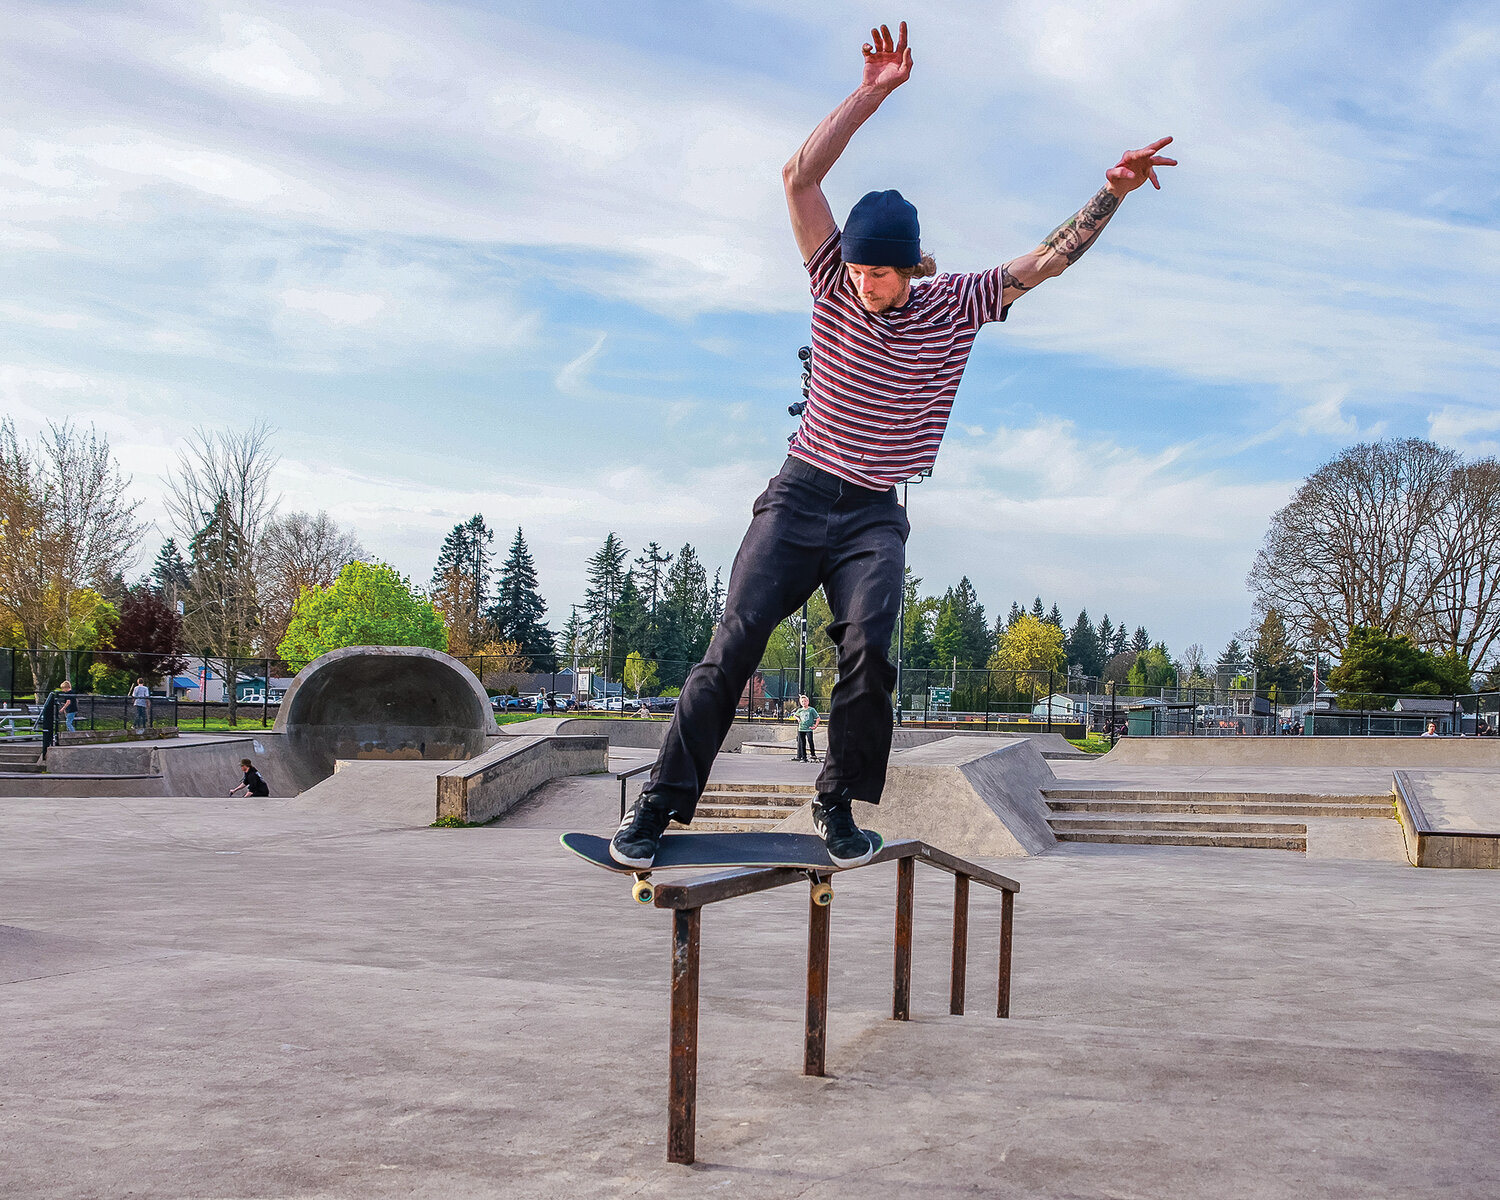 Justin Berni, a resident of Battle Ground, rides a rail at the Battle Ground Skate Park on the evening of Tuesday, May 2.